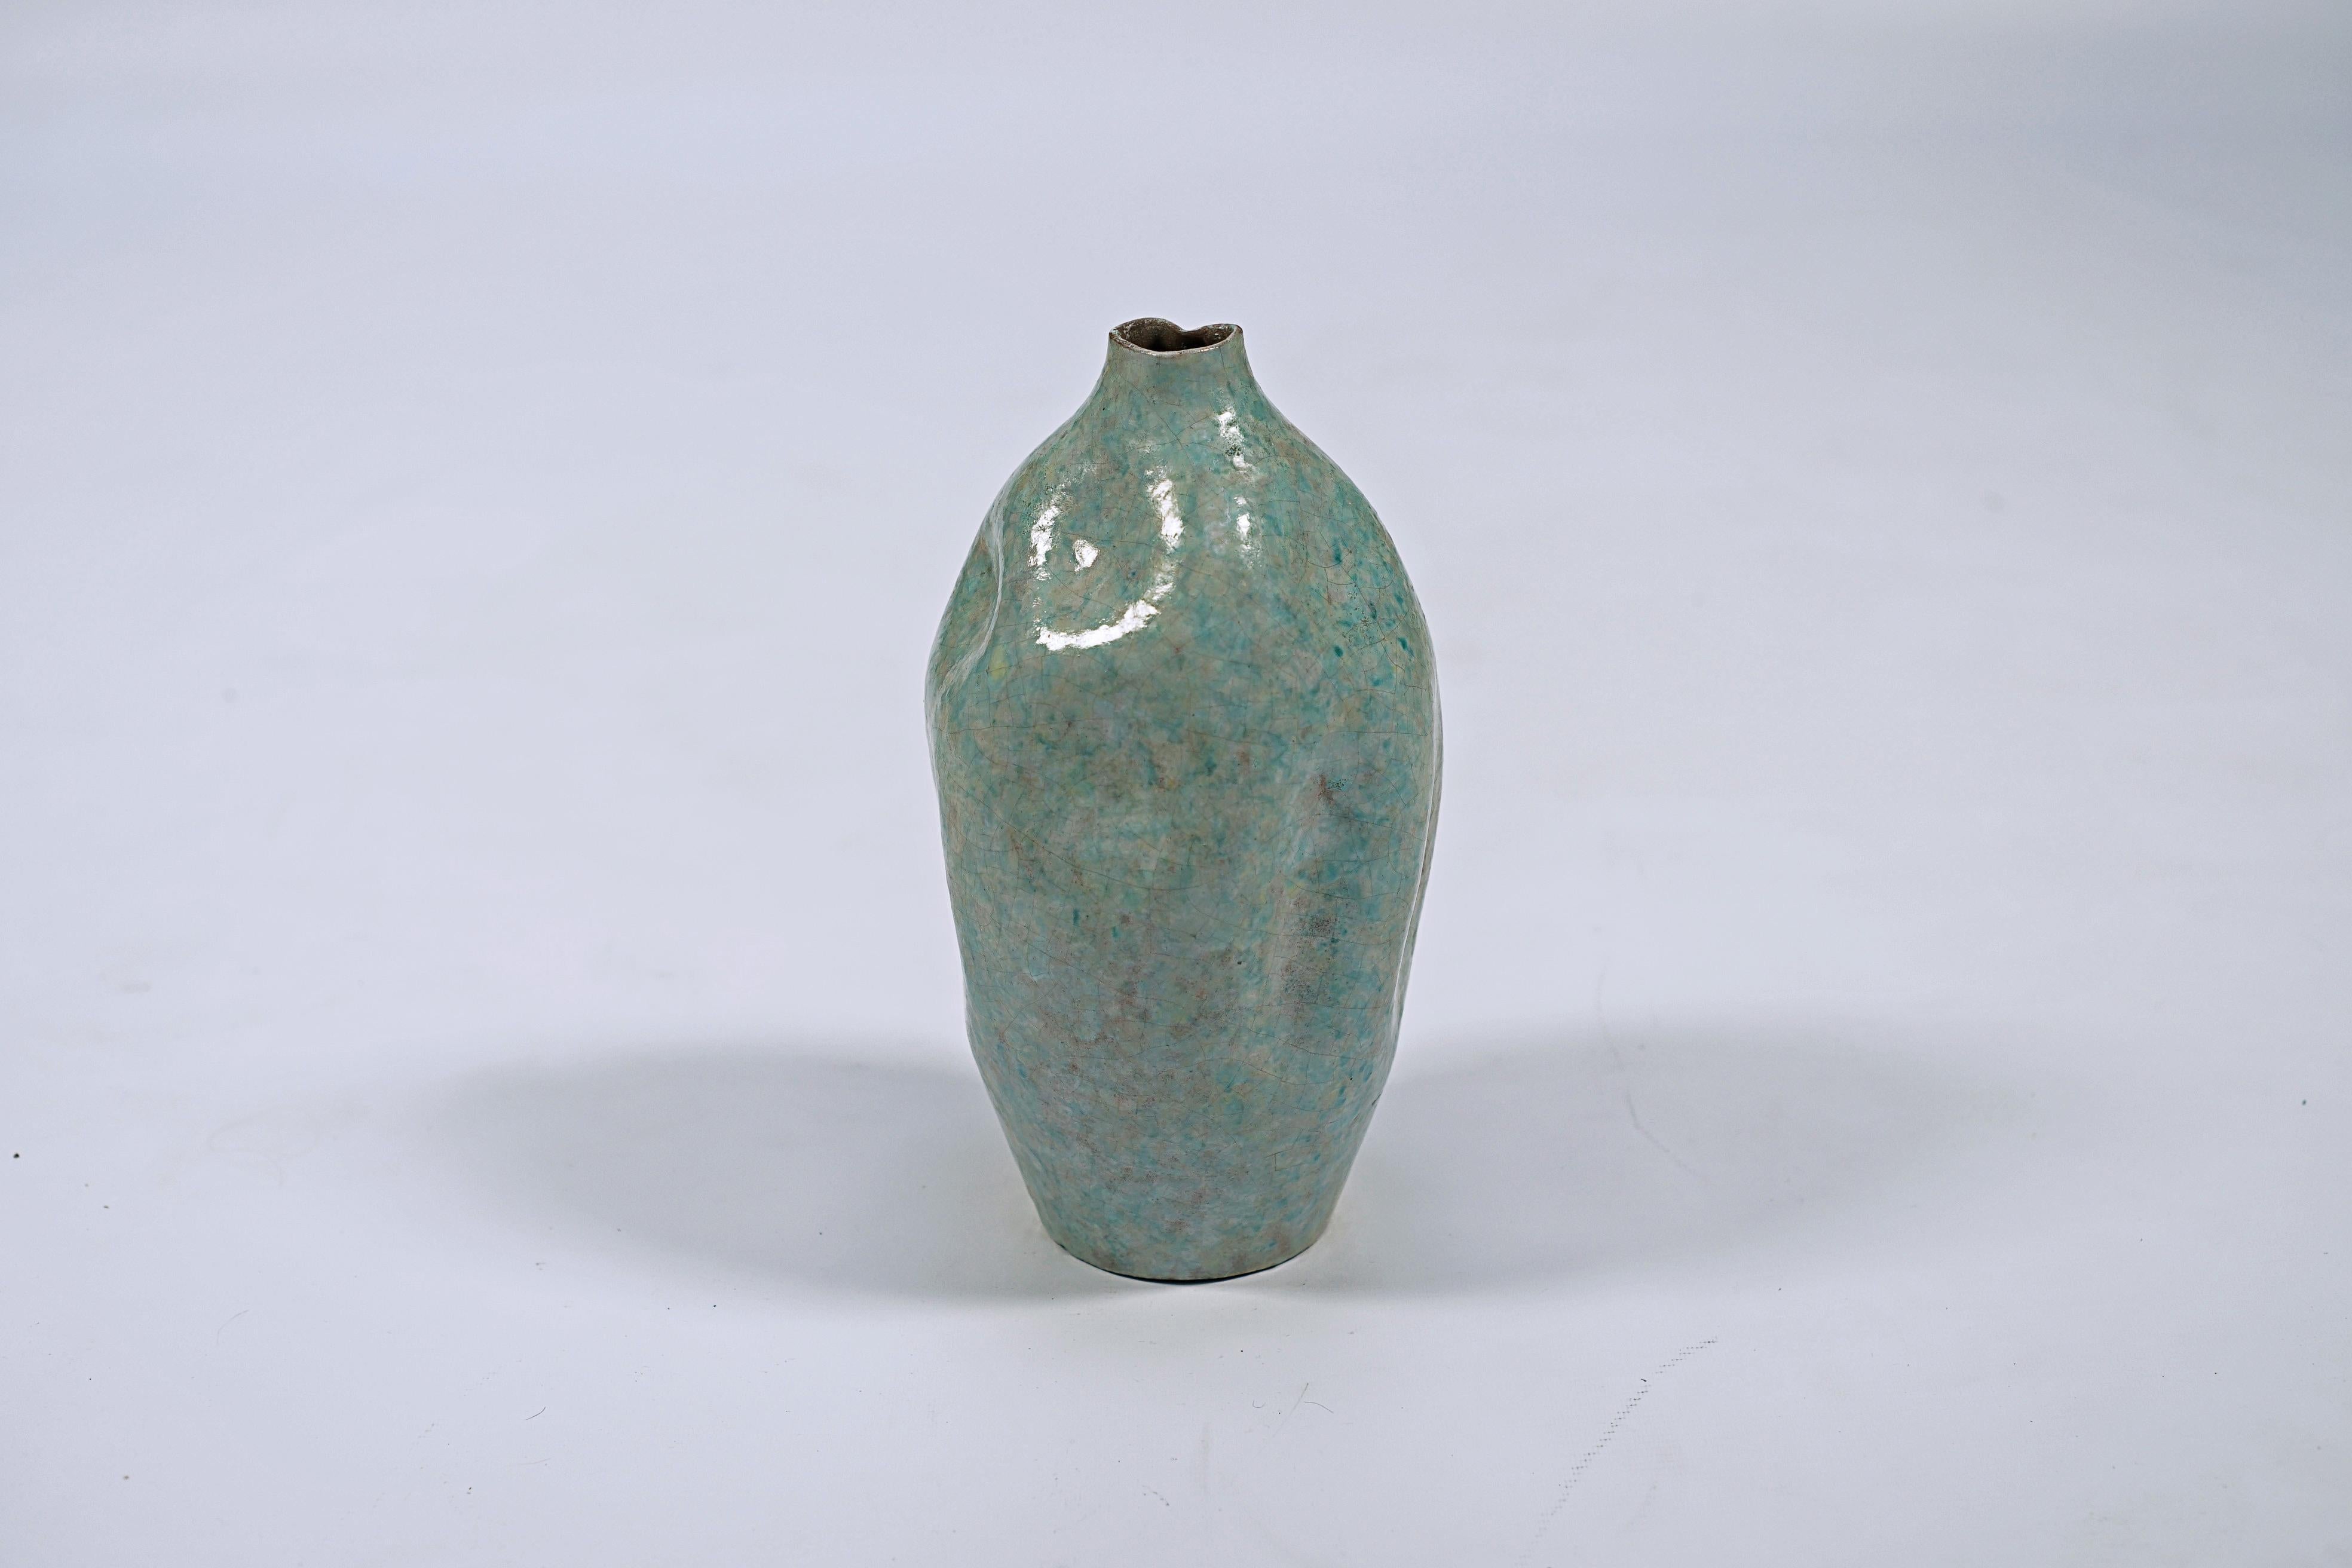 Oval ceramic vase with dent texture, in light blue, pink and yellow tones. By Marcelo Fantoni (1915-2011), Signature Stamp, Fantoni, Made Italy

Italy, CIRCA 1950.